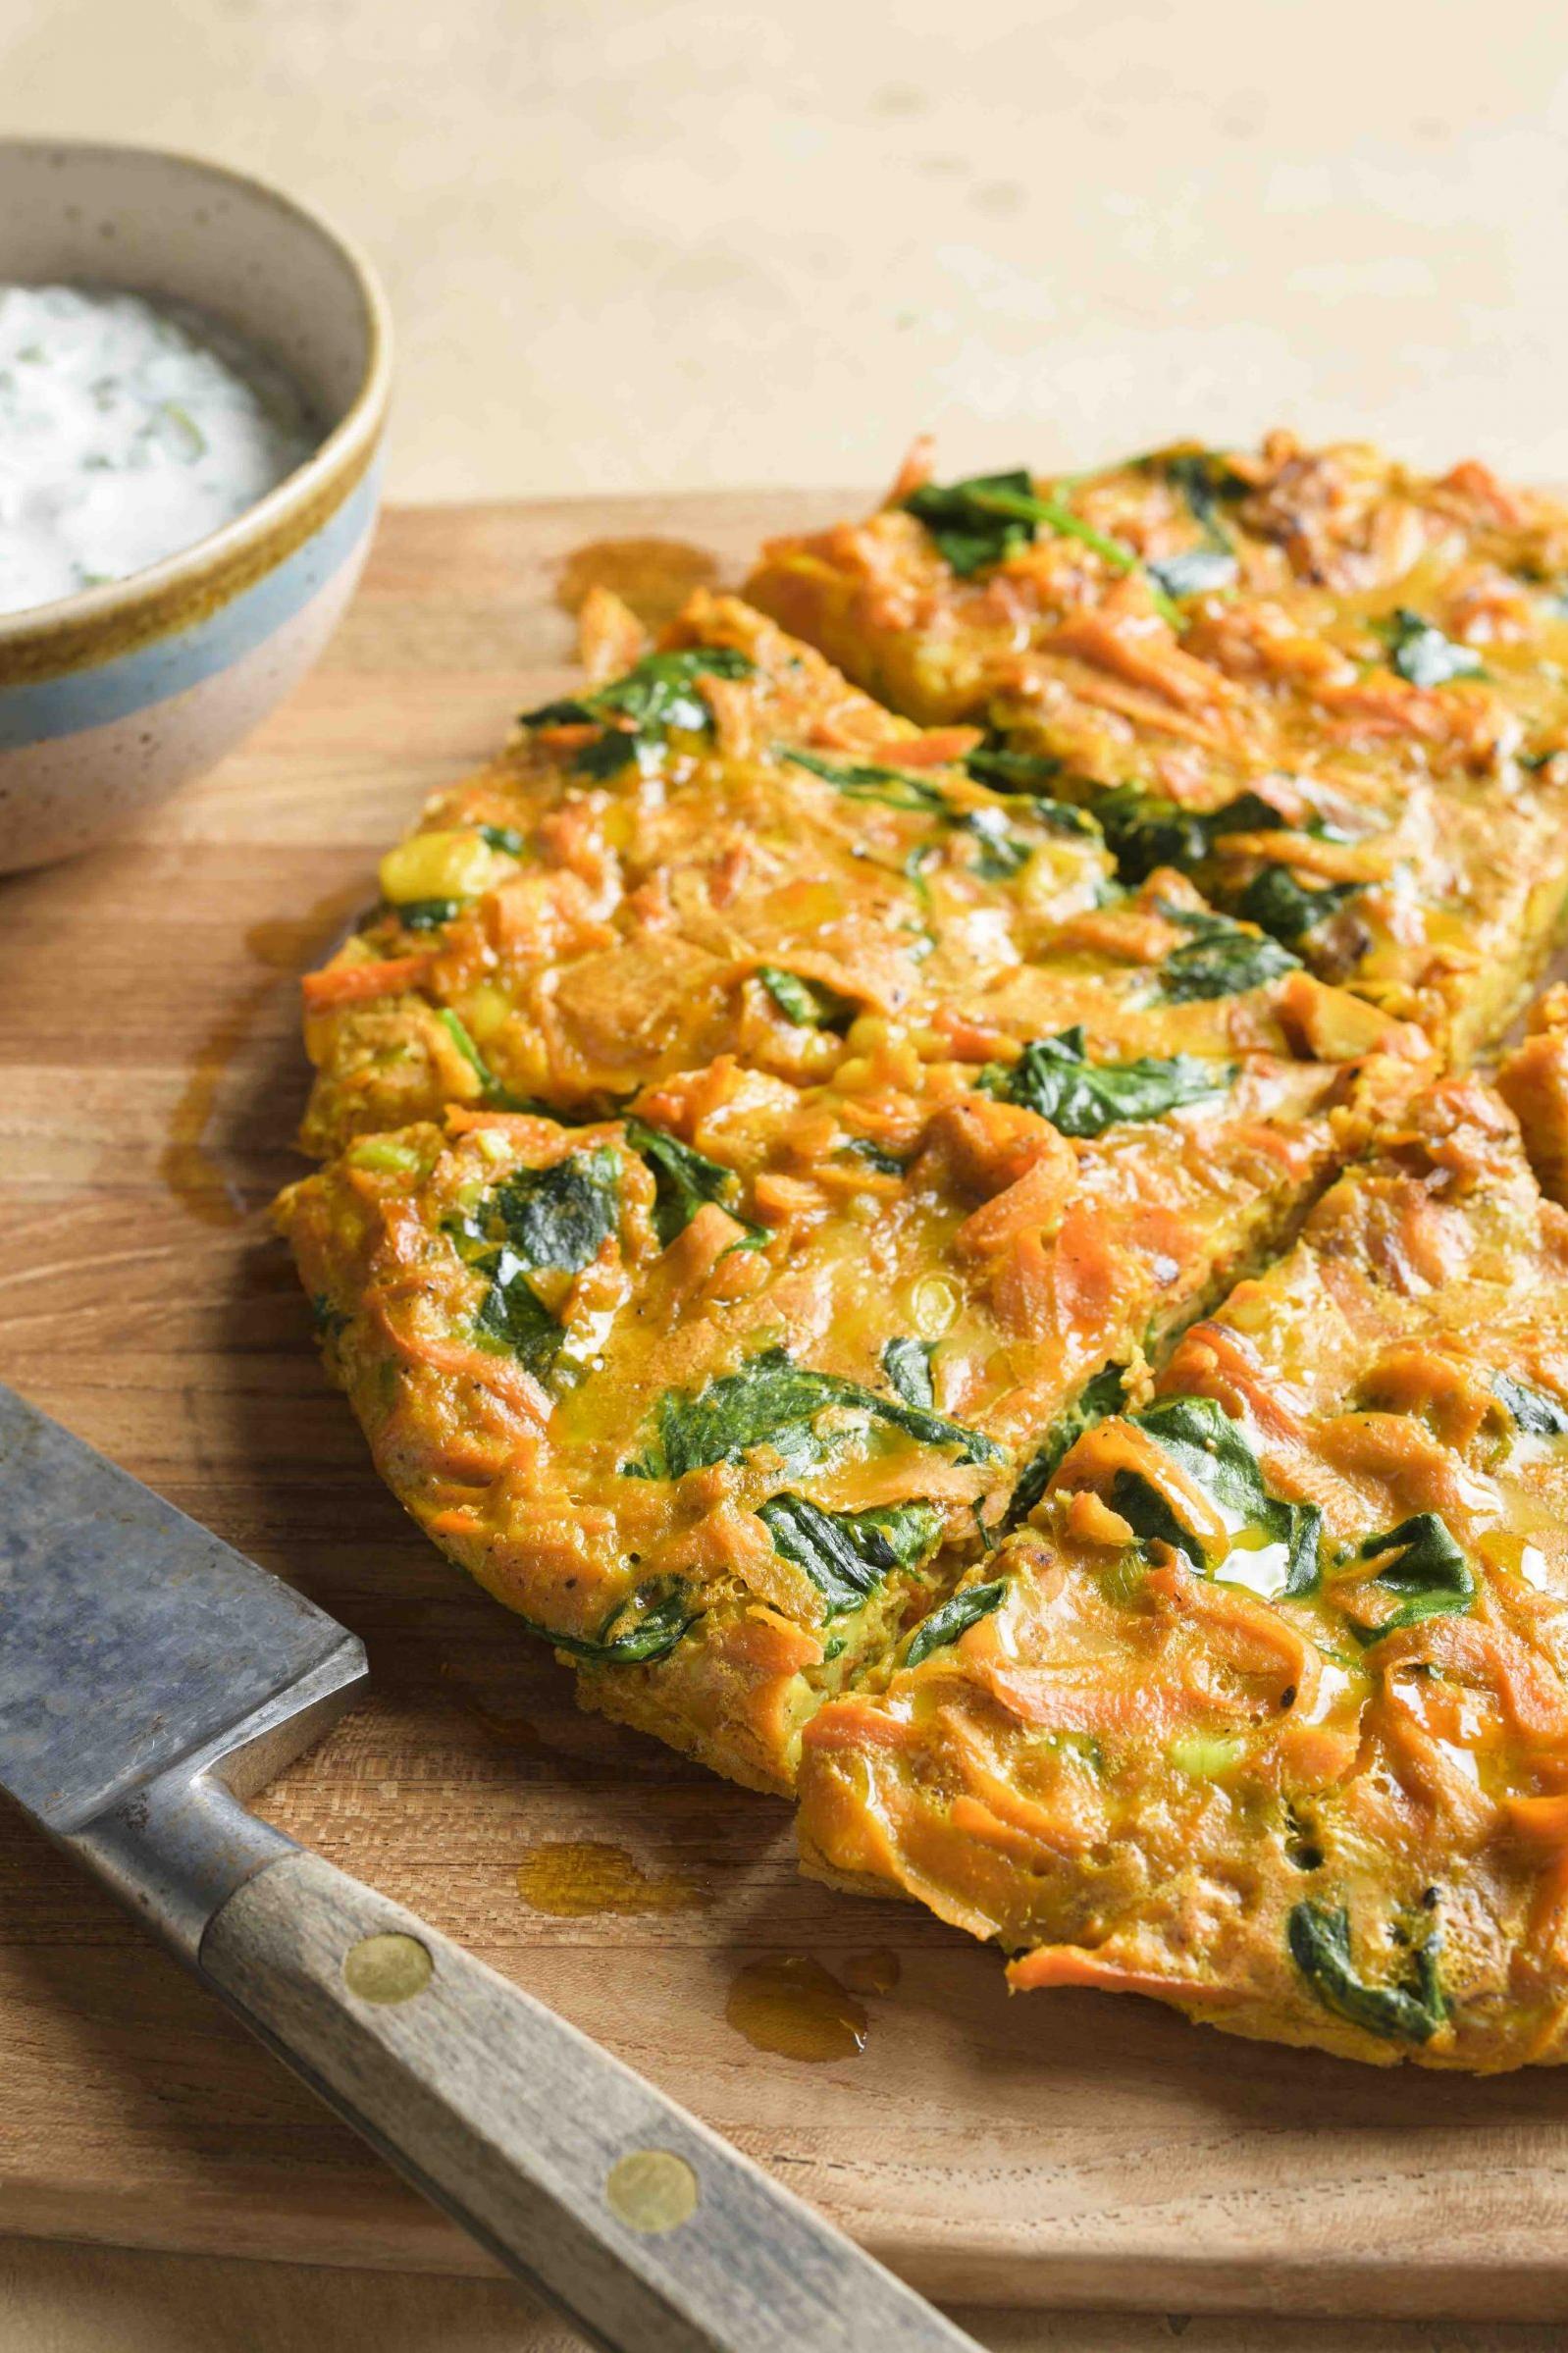  With hints of cumin and turmeric, this omelet has a zesty and fragrant kick.